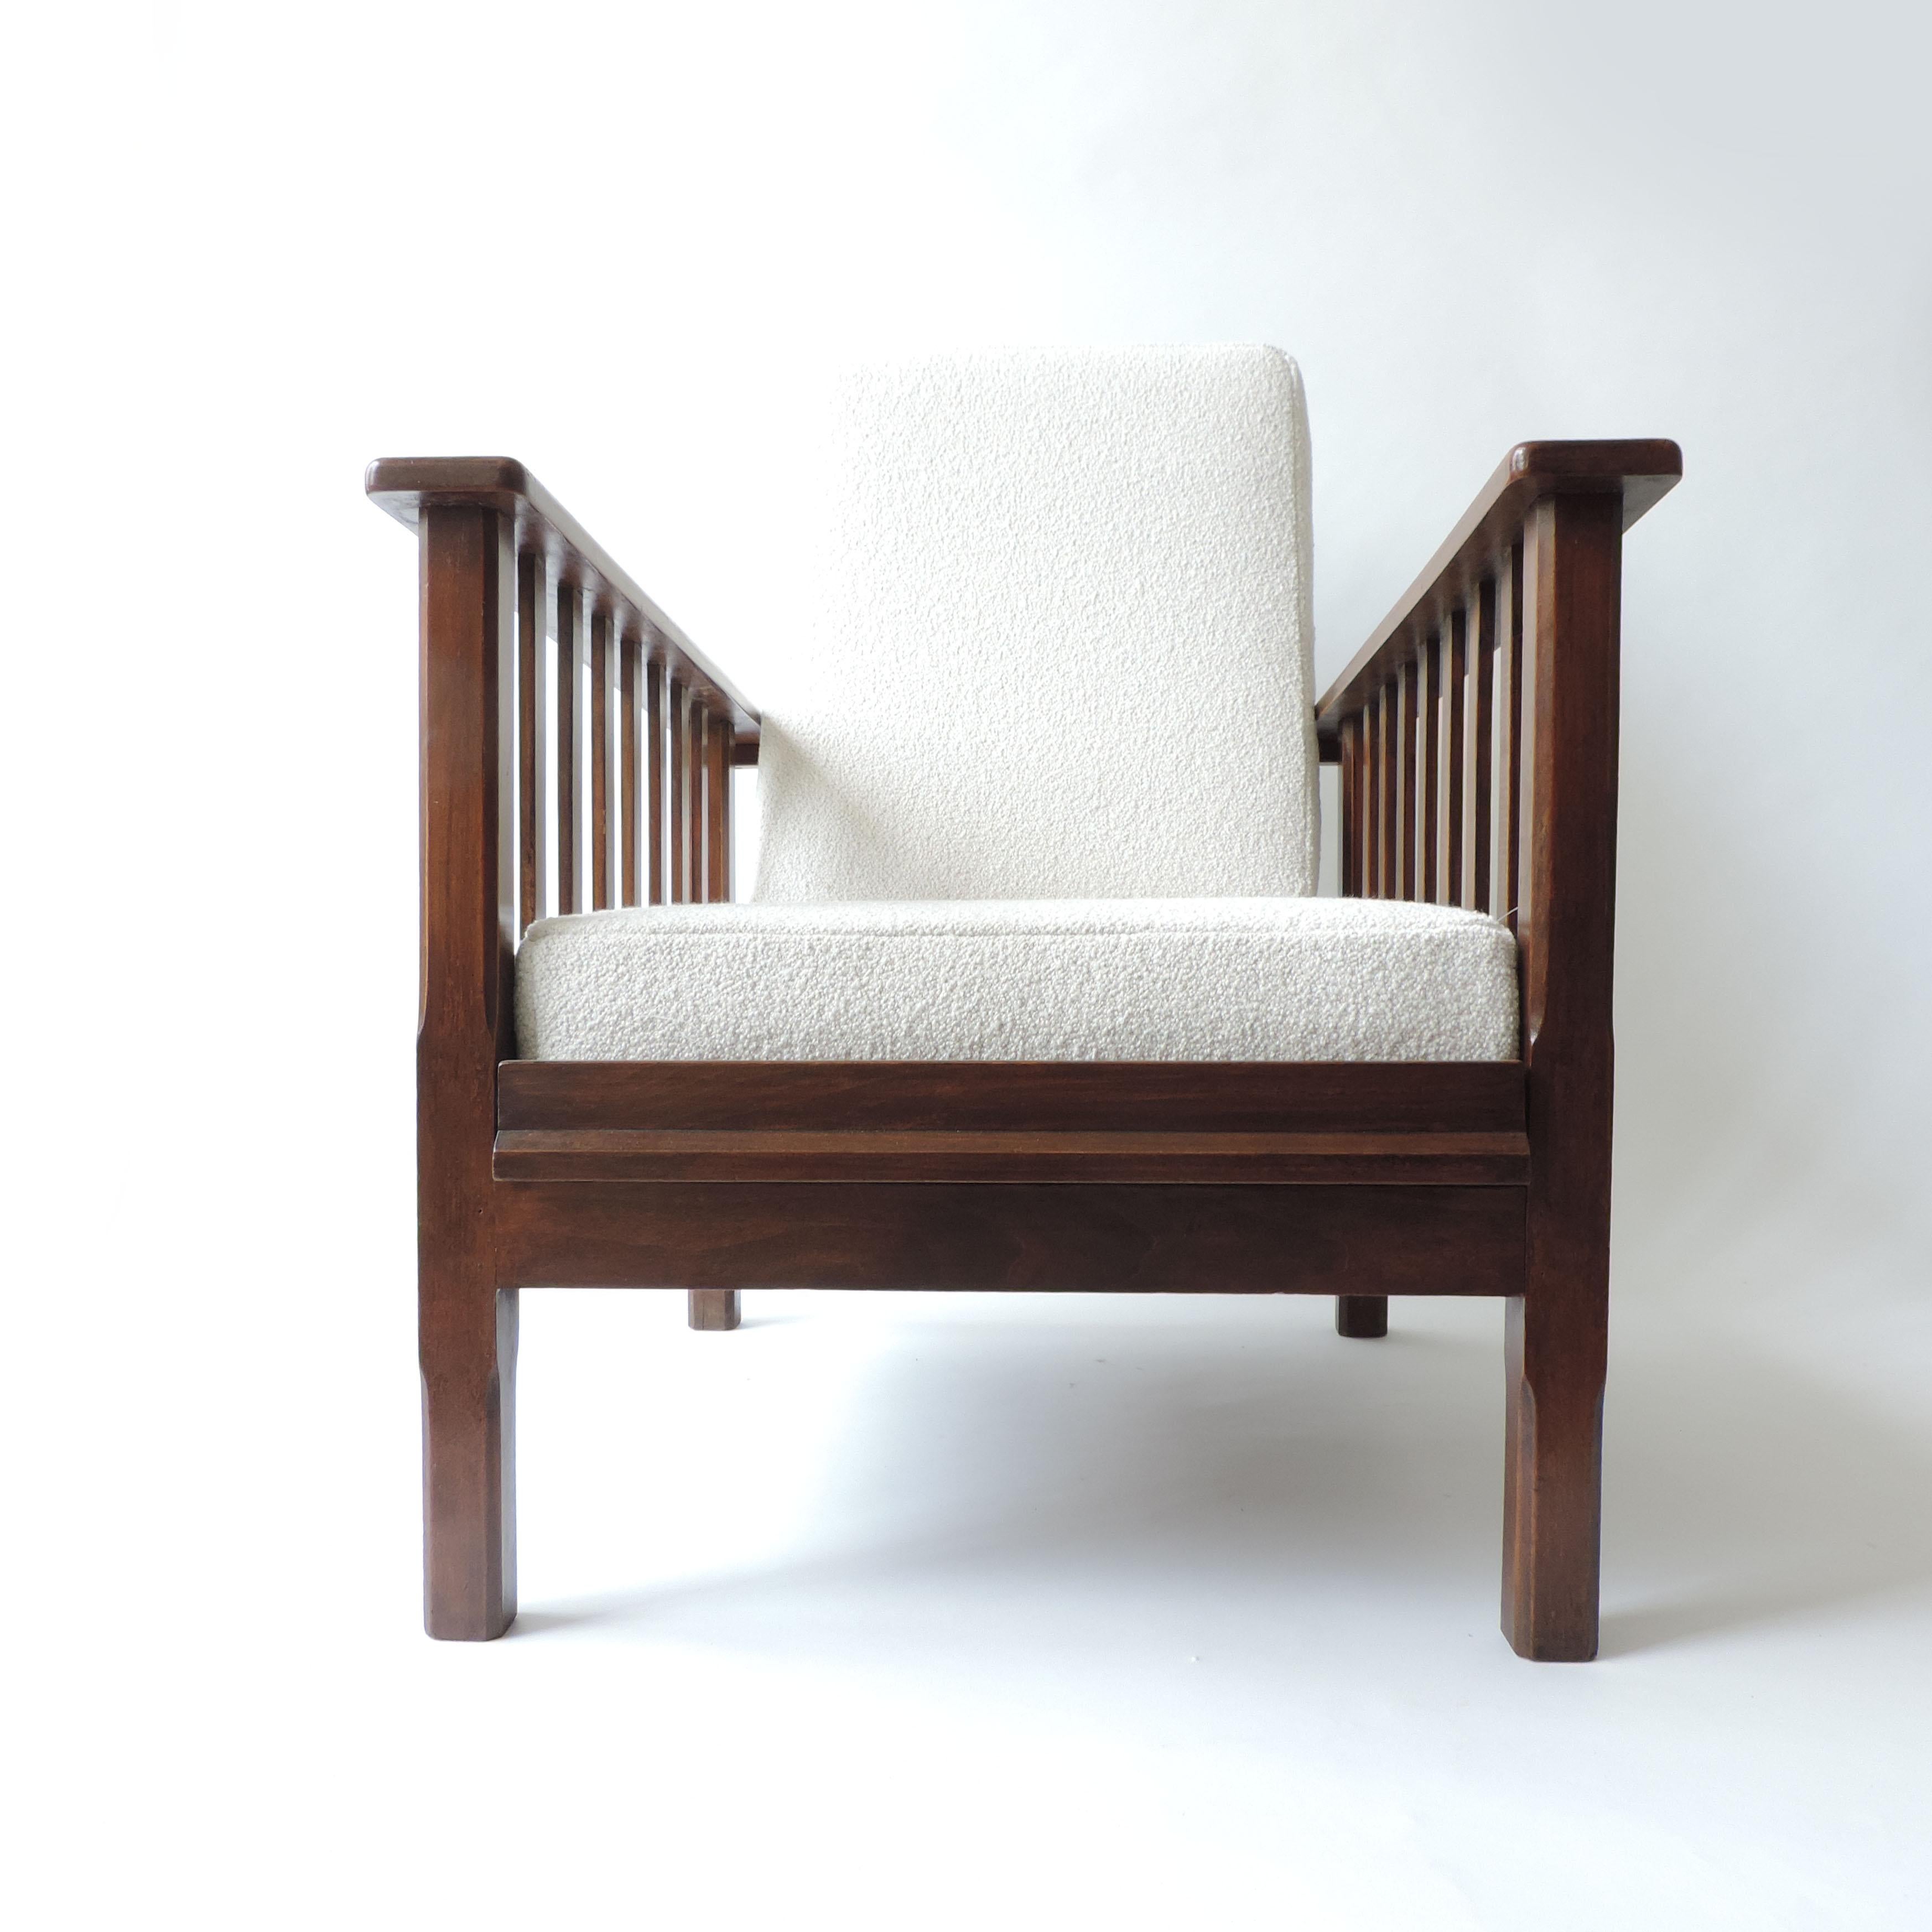 Mid-20th Century Italian Rationalist Adjustable Wooden Lounge Chair, Italy 1940s For Sale